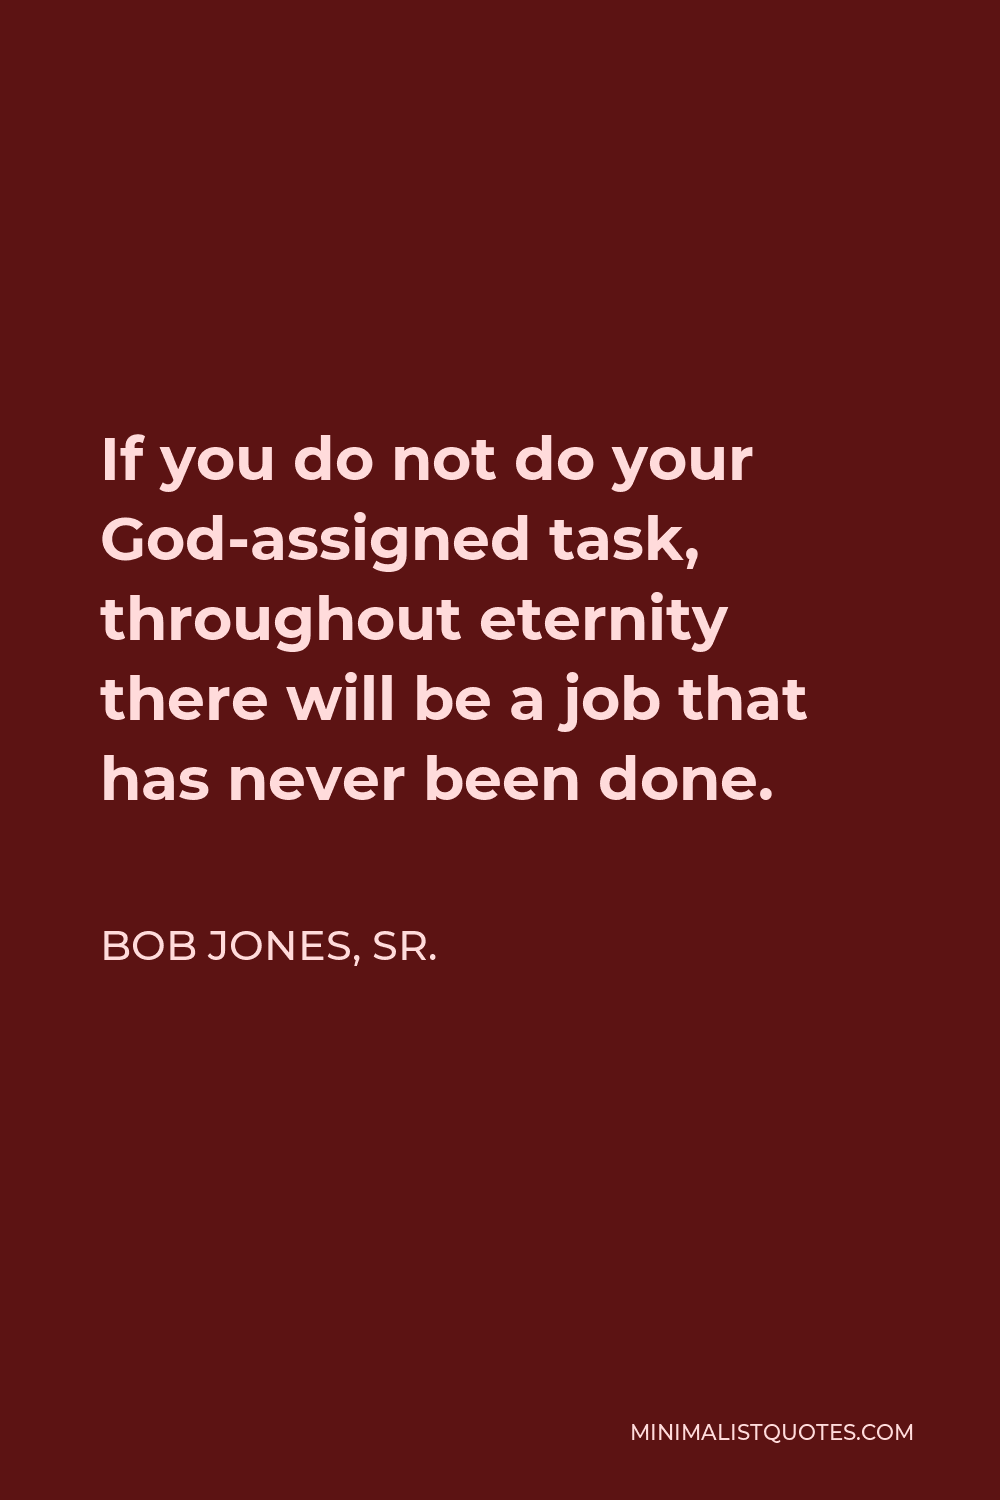 Bob Jones, Sr. Quote - If you do not do your God-assigned task, throughout eternity there will be a job that has never been done.